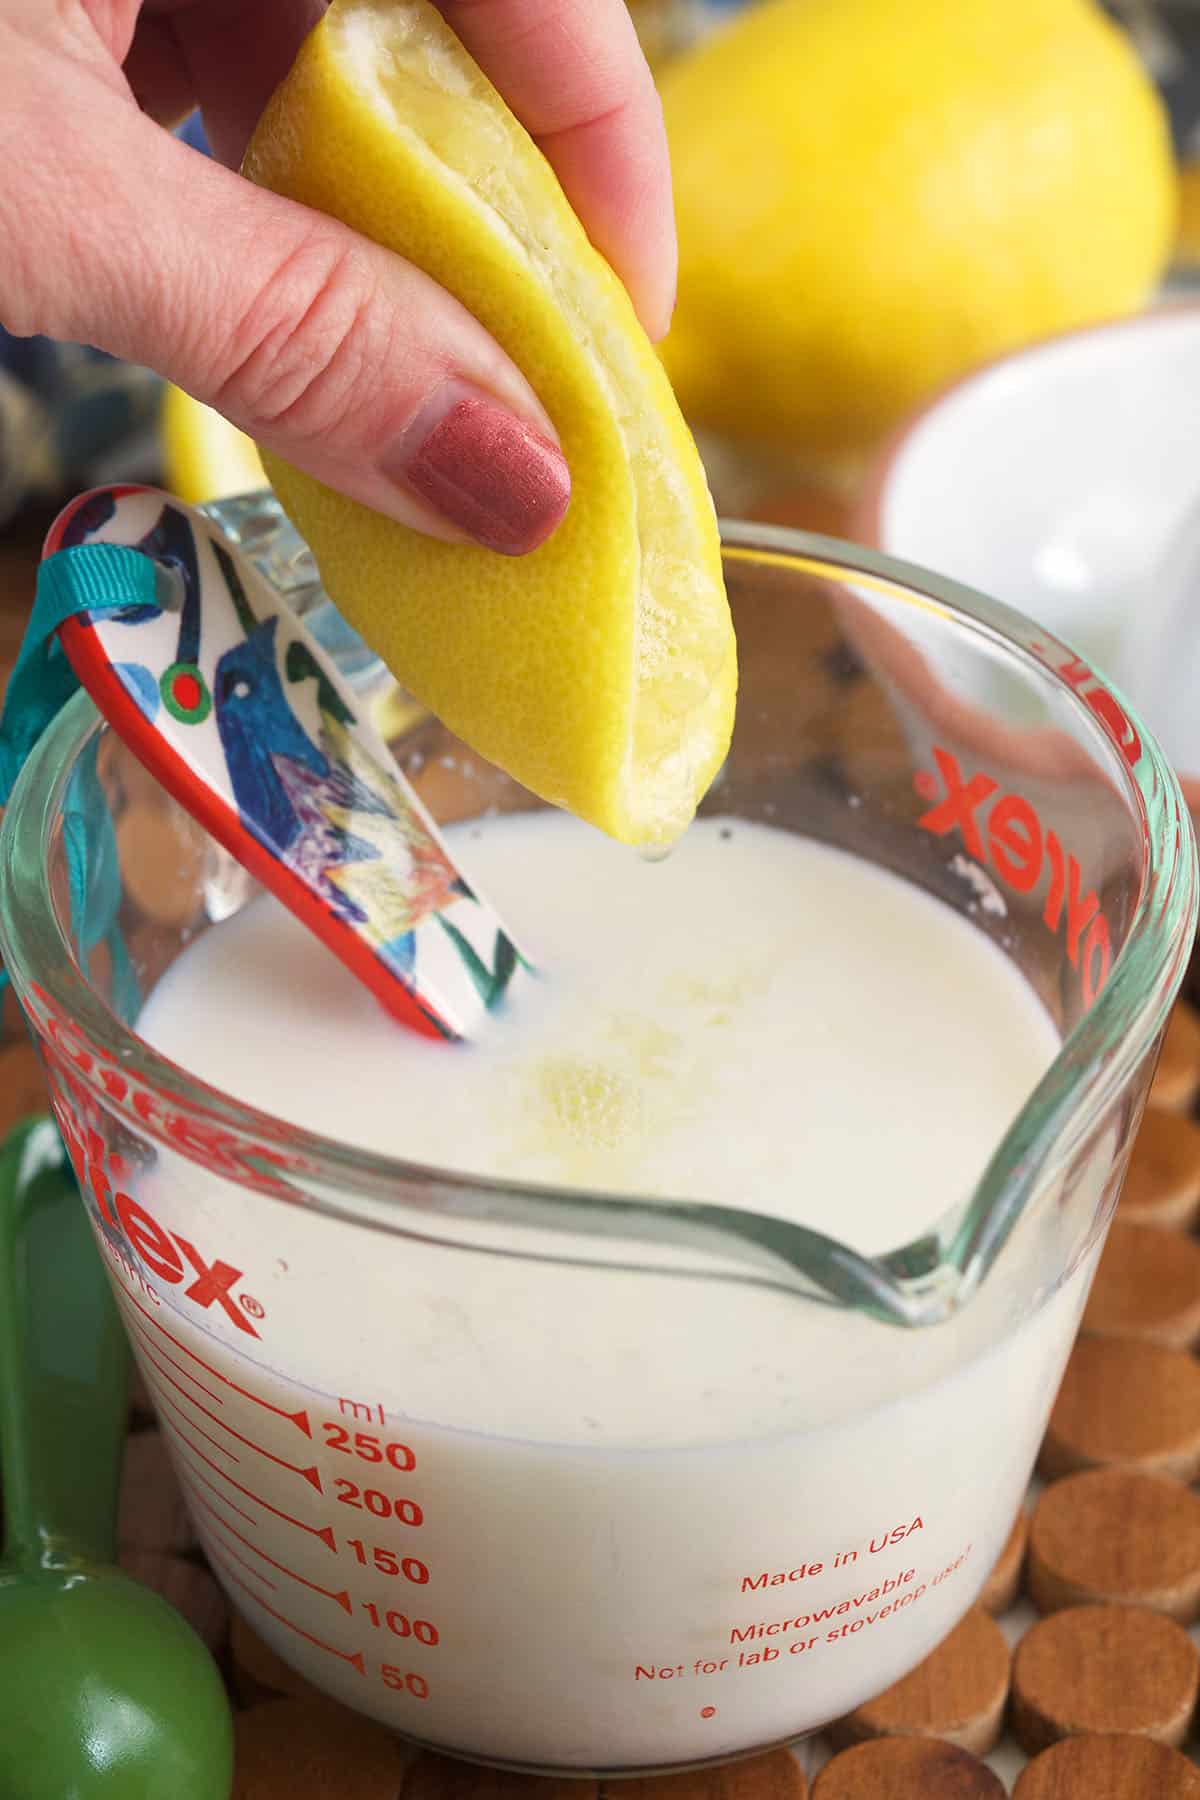 A lemon is being squeezed over a cup of milk.